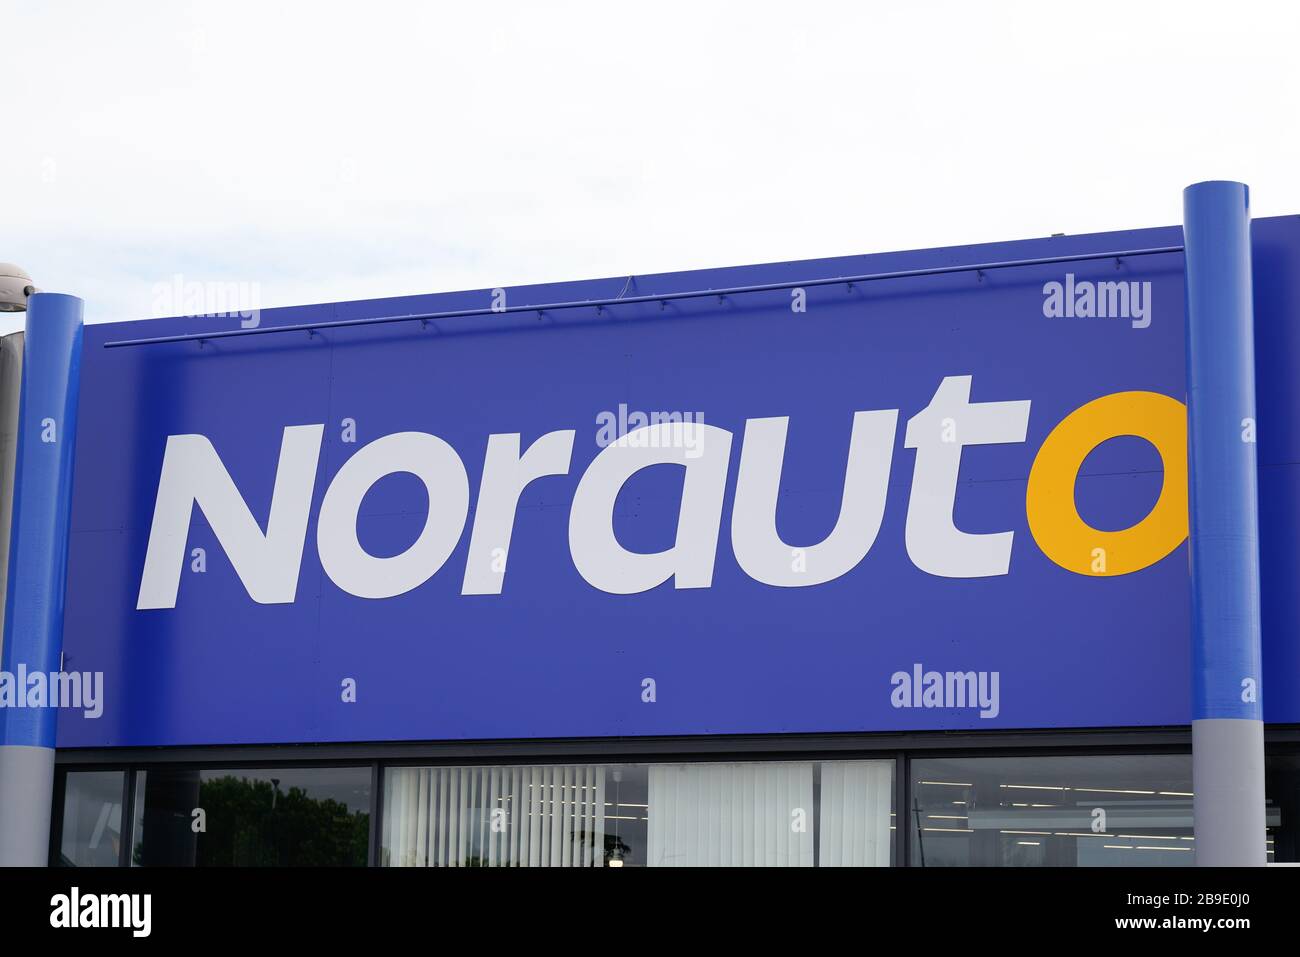 Bordeaux , Aquitaine / France - 09 24 2019 : Norauto logo sign shop on a wall Stock Photo